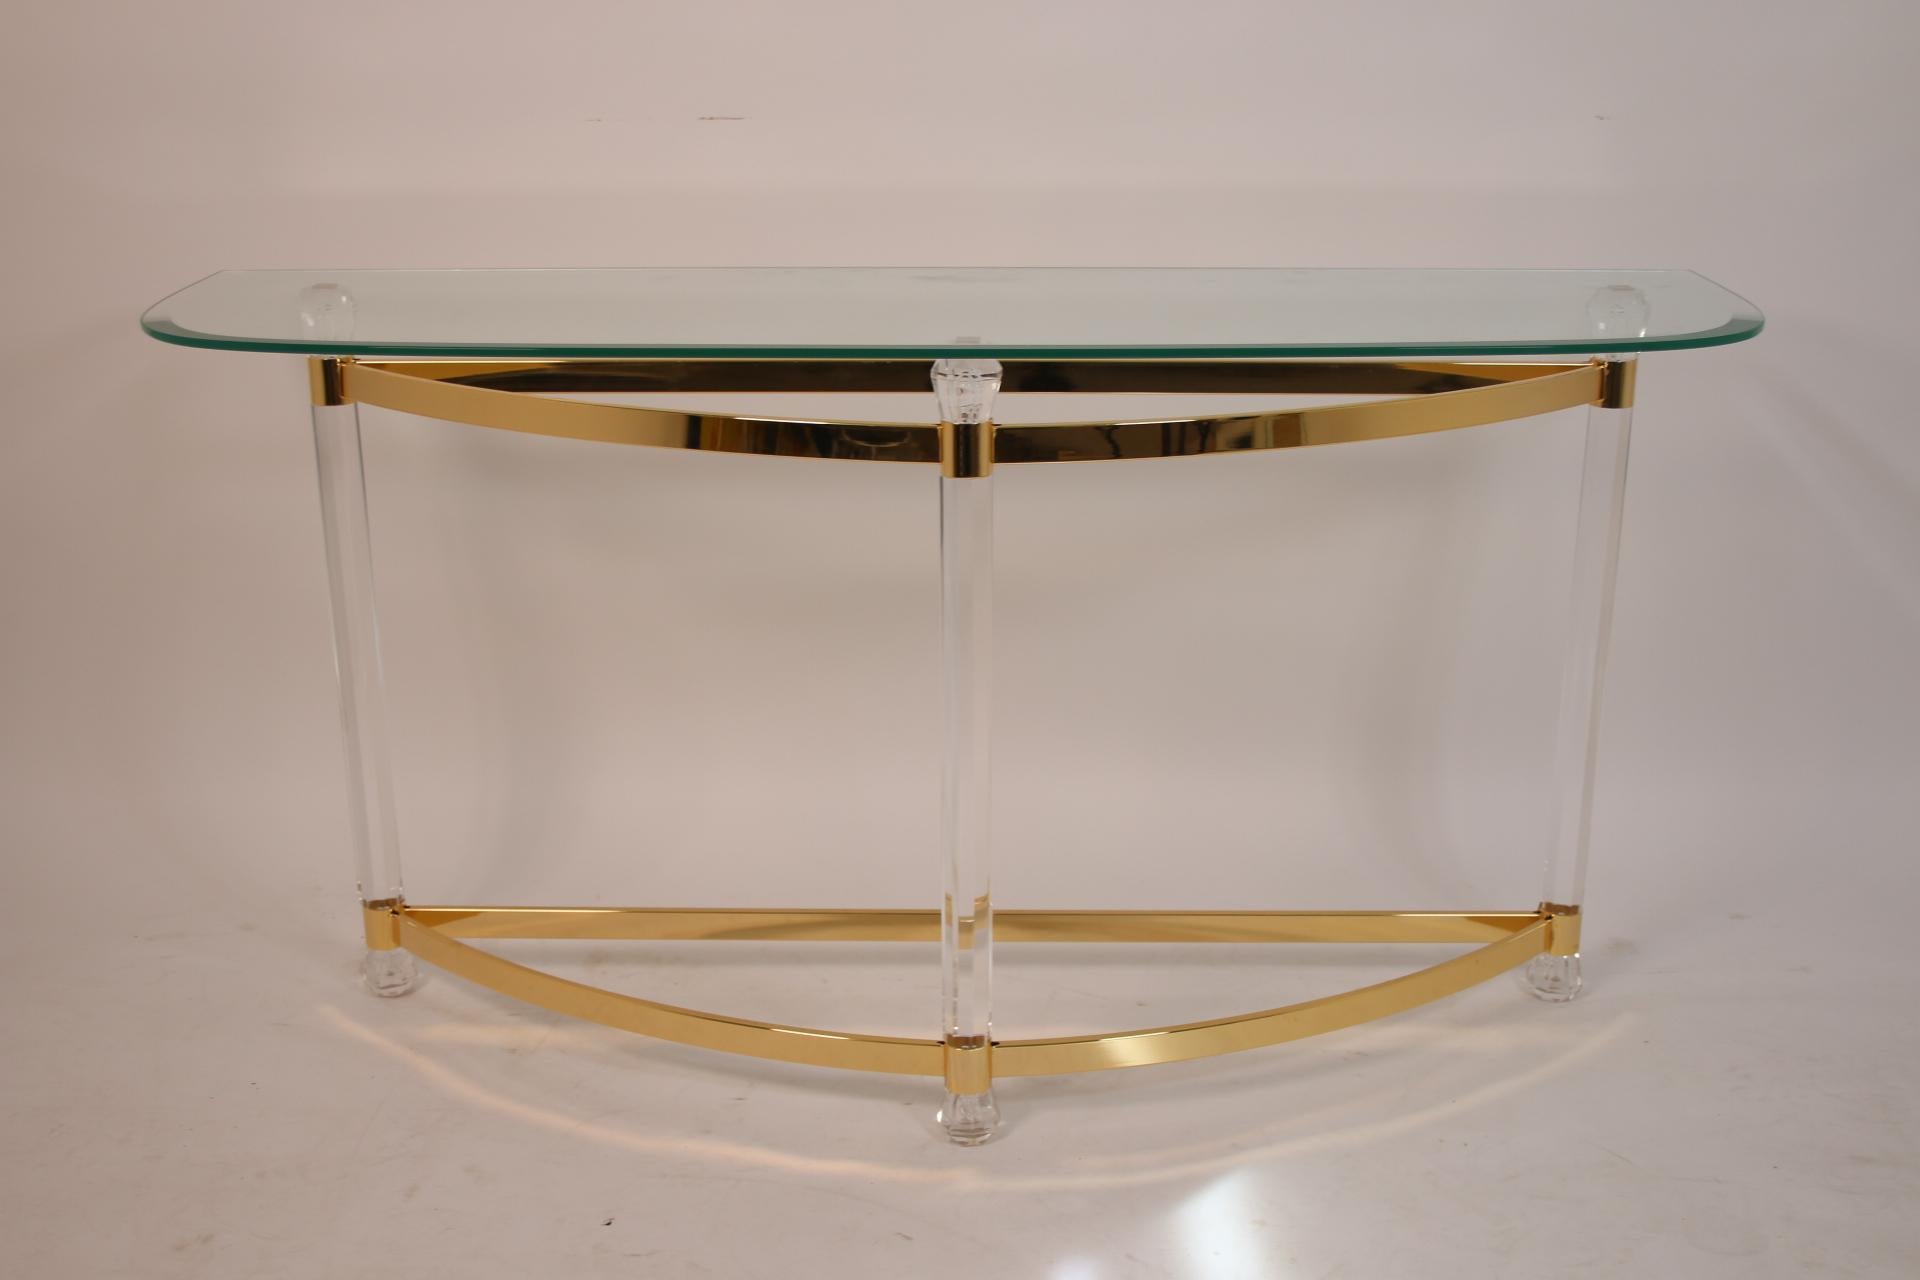 Italian Plexiglass Side Table Crescent Moon Hollywood Regency


Plexiglass table with gold accents, the table top has the shape of a crescent moon.

The top has a slightly darker transparent appearance, which makes the plexiglass frame stand